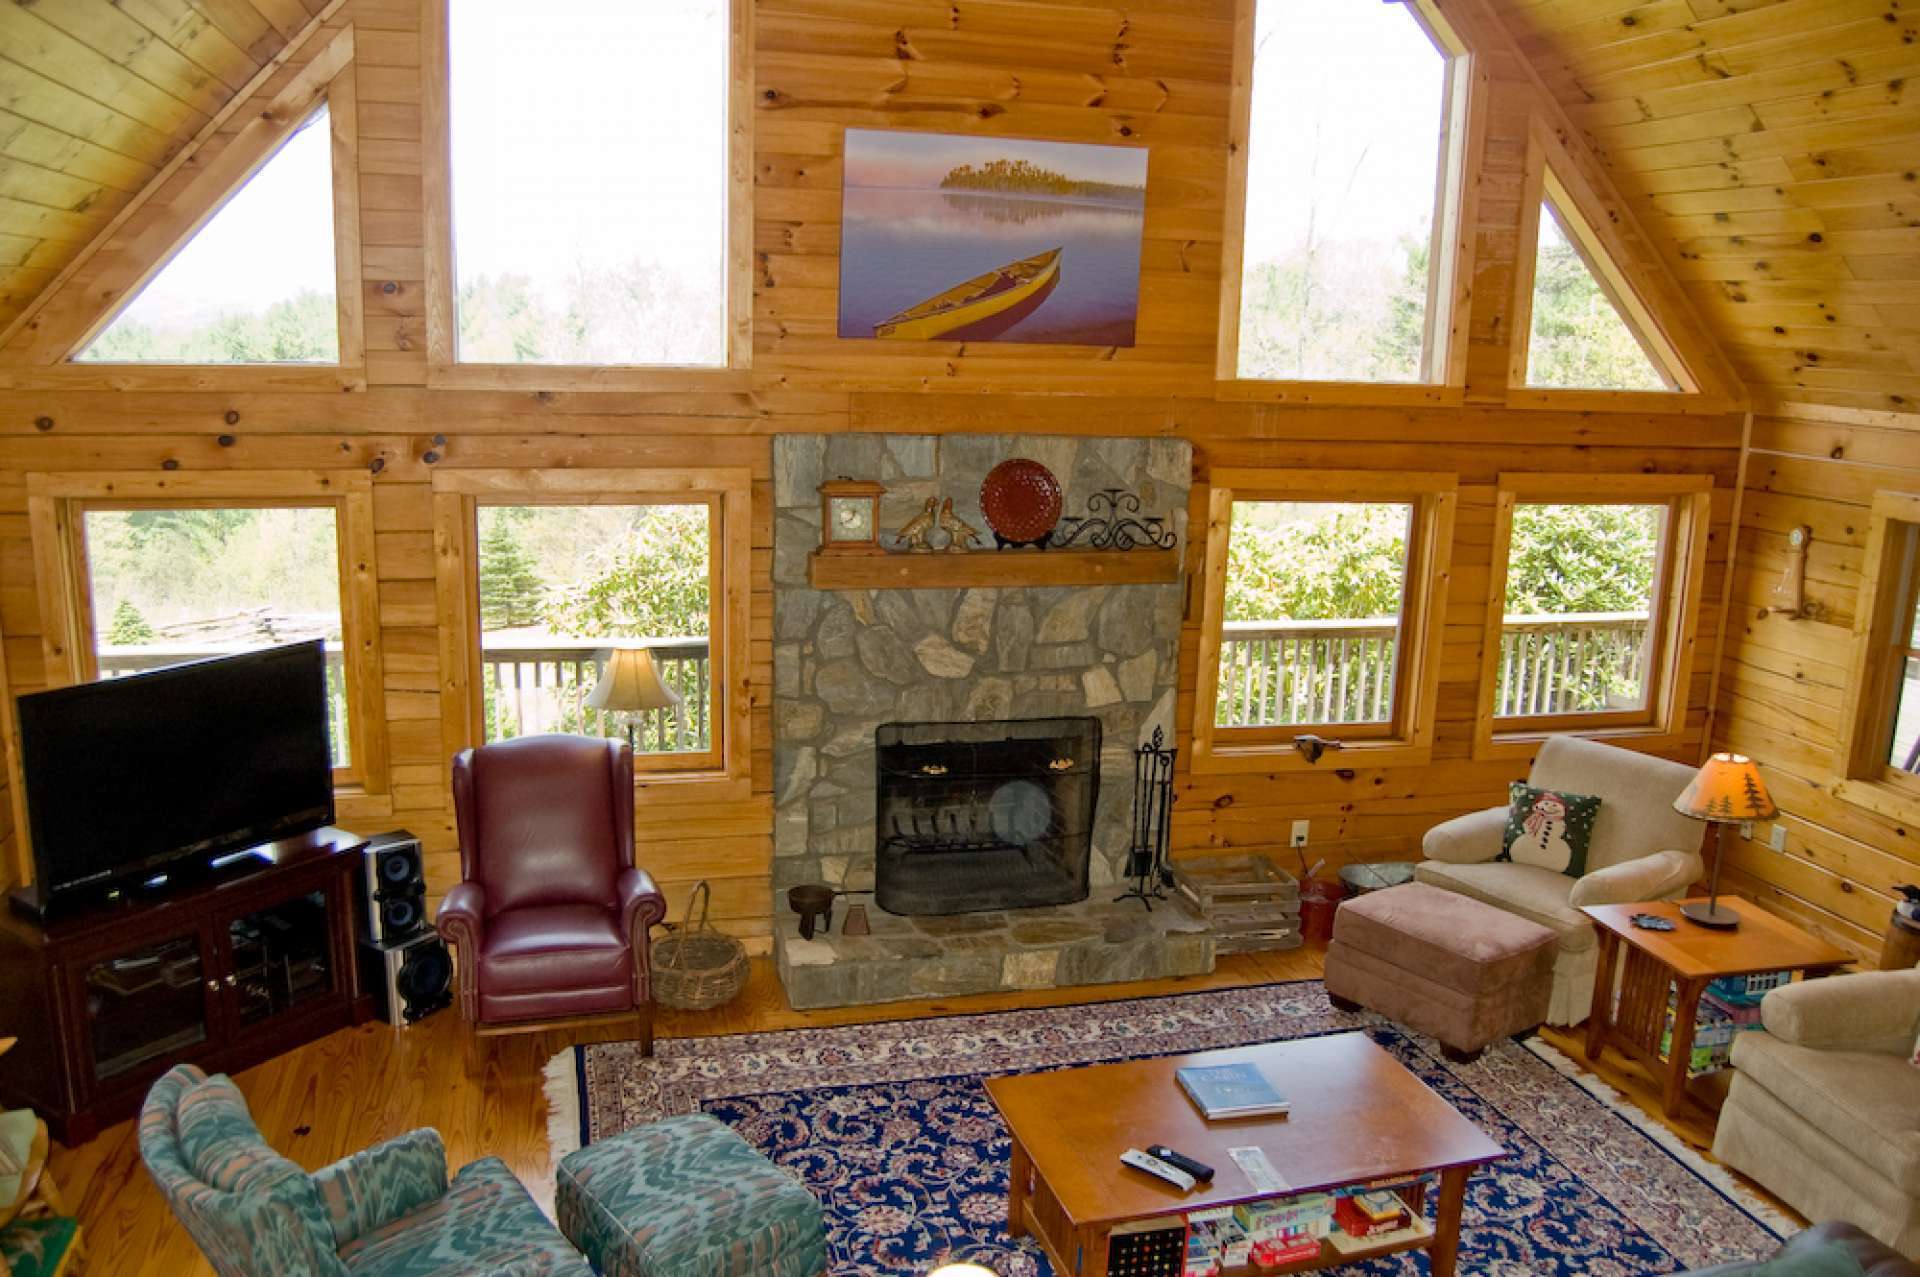 The focal point of the great room is the wood burning, stone fireplace flanked by windows filling the cabin with natural light and allowing you to enjoy the mountain scenery throughout the cabin.